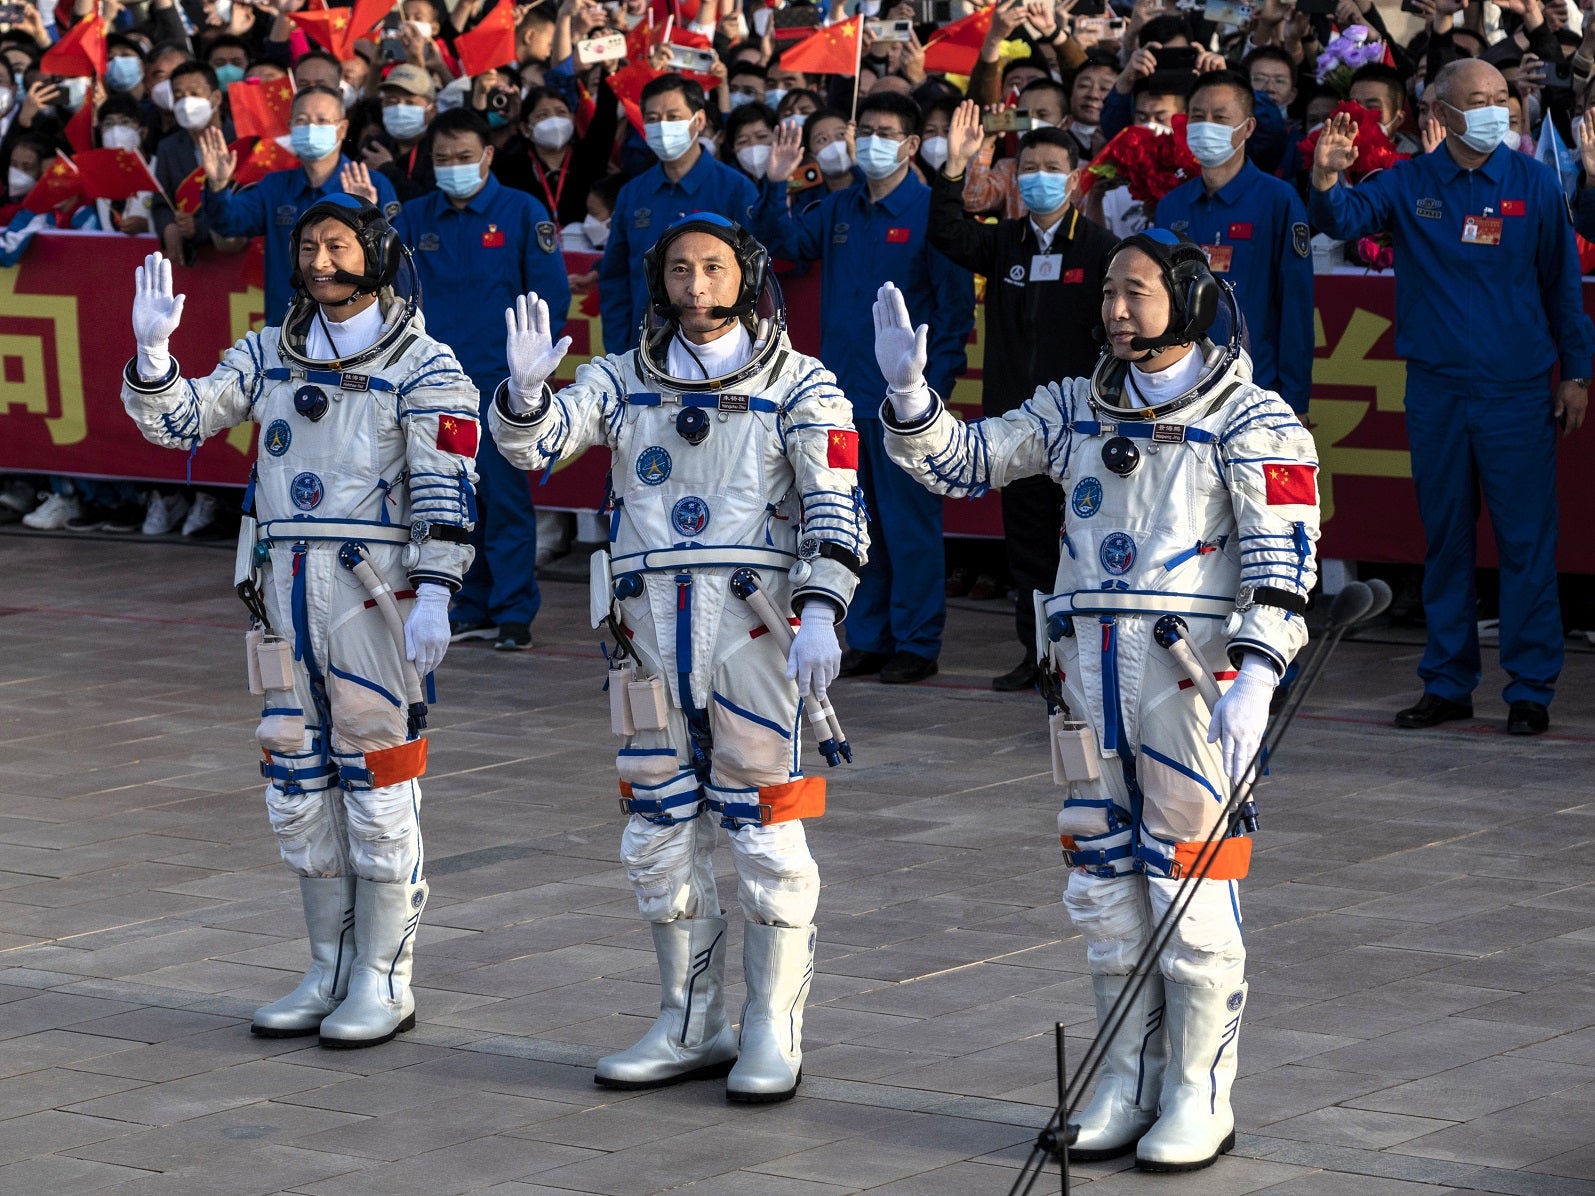 Chinese astronauts and crew of the Shenzhou-16 mission at China’s Manned Space Agency wave to well wishers at a pre-launch departure ceremony on 30 May, 2023 in Jiuquan, China